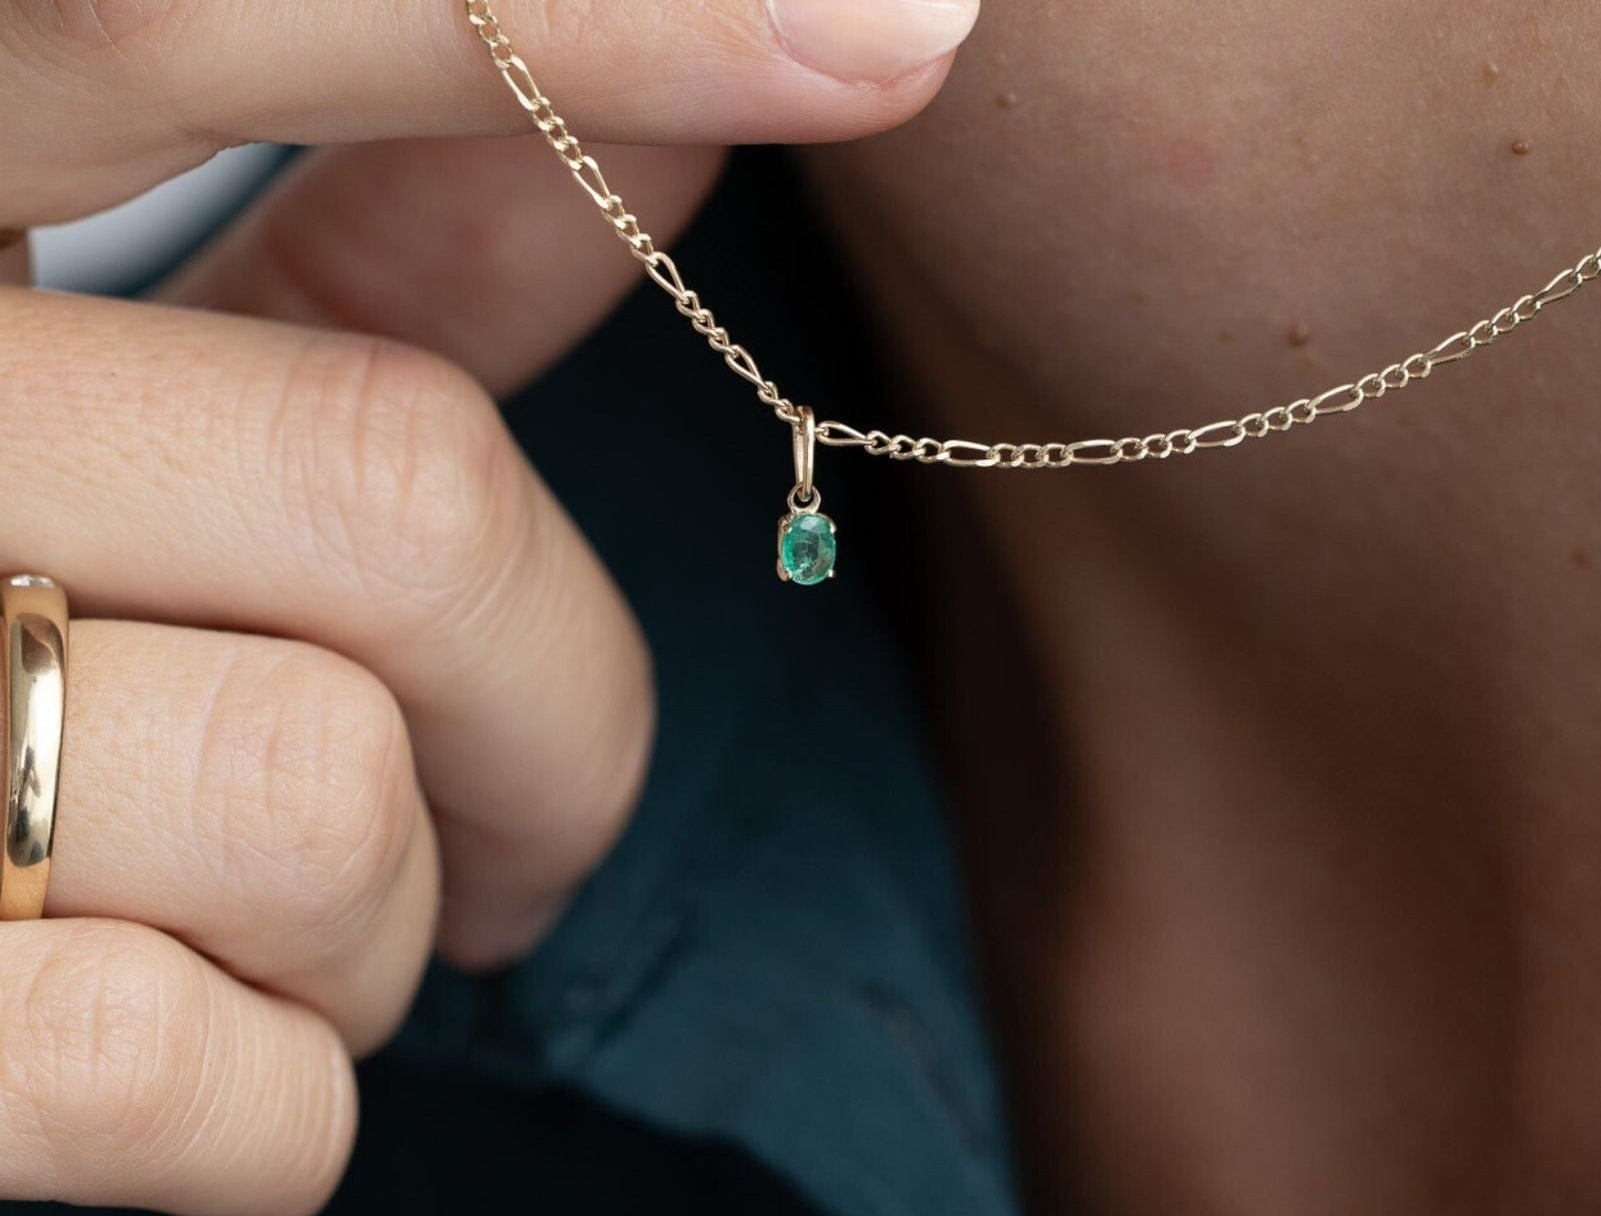 Picture of Luna Rae Solid 9k Gold Emerald Necklace